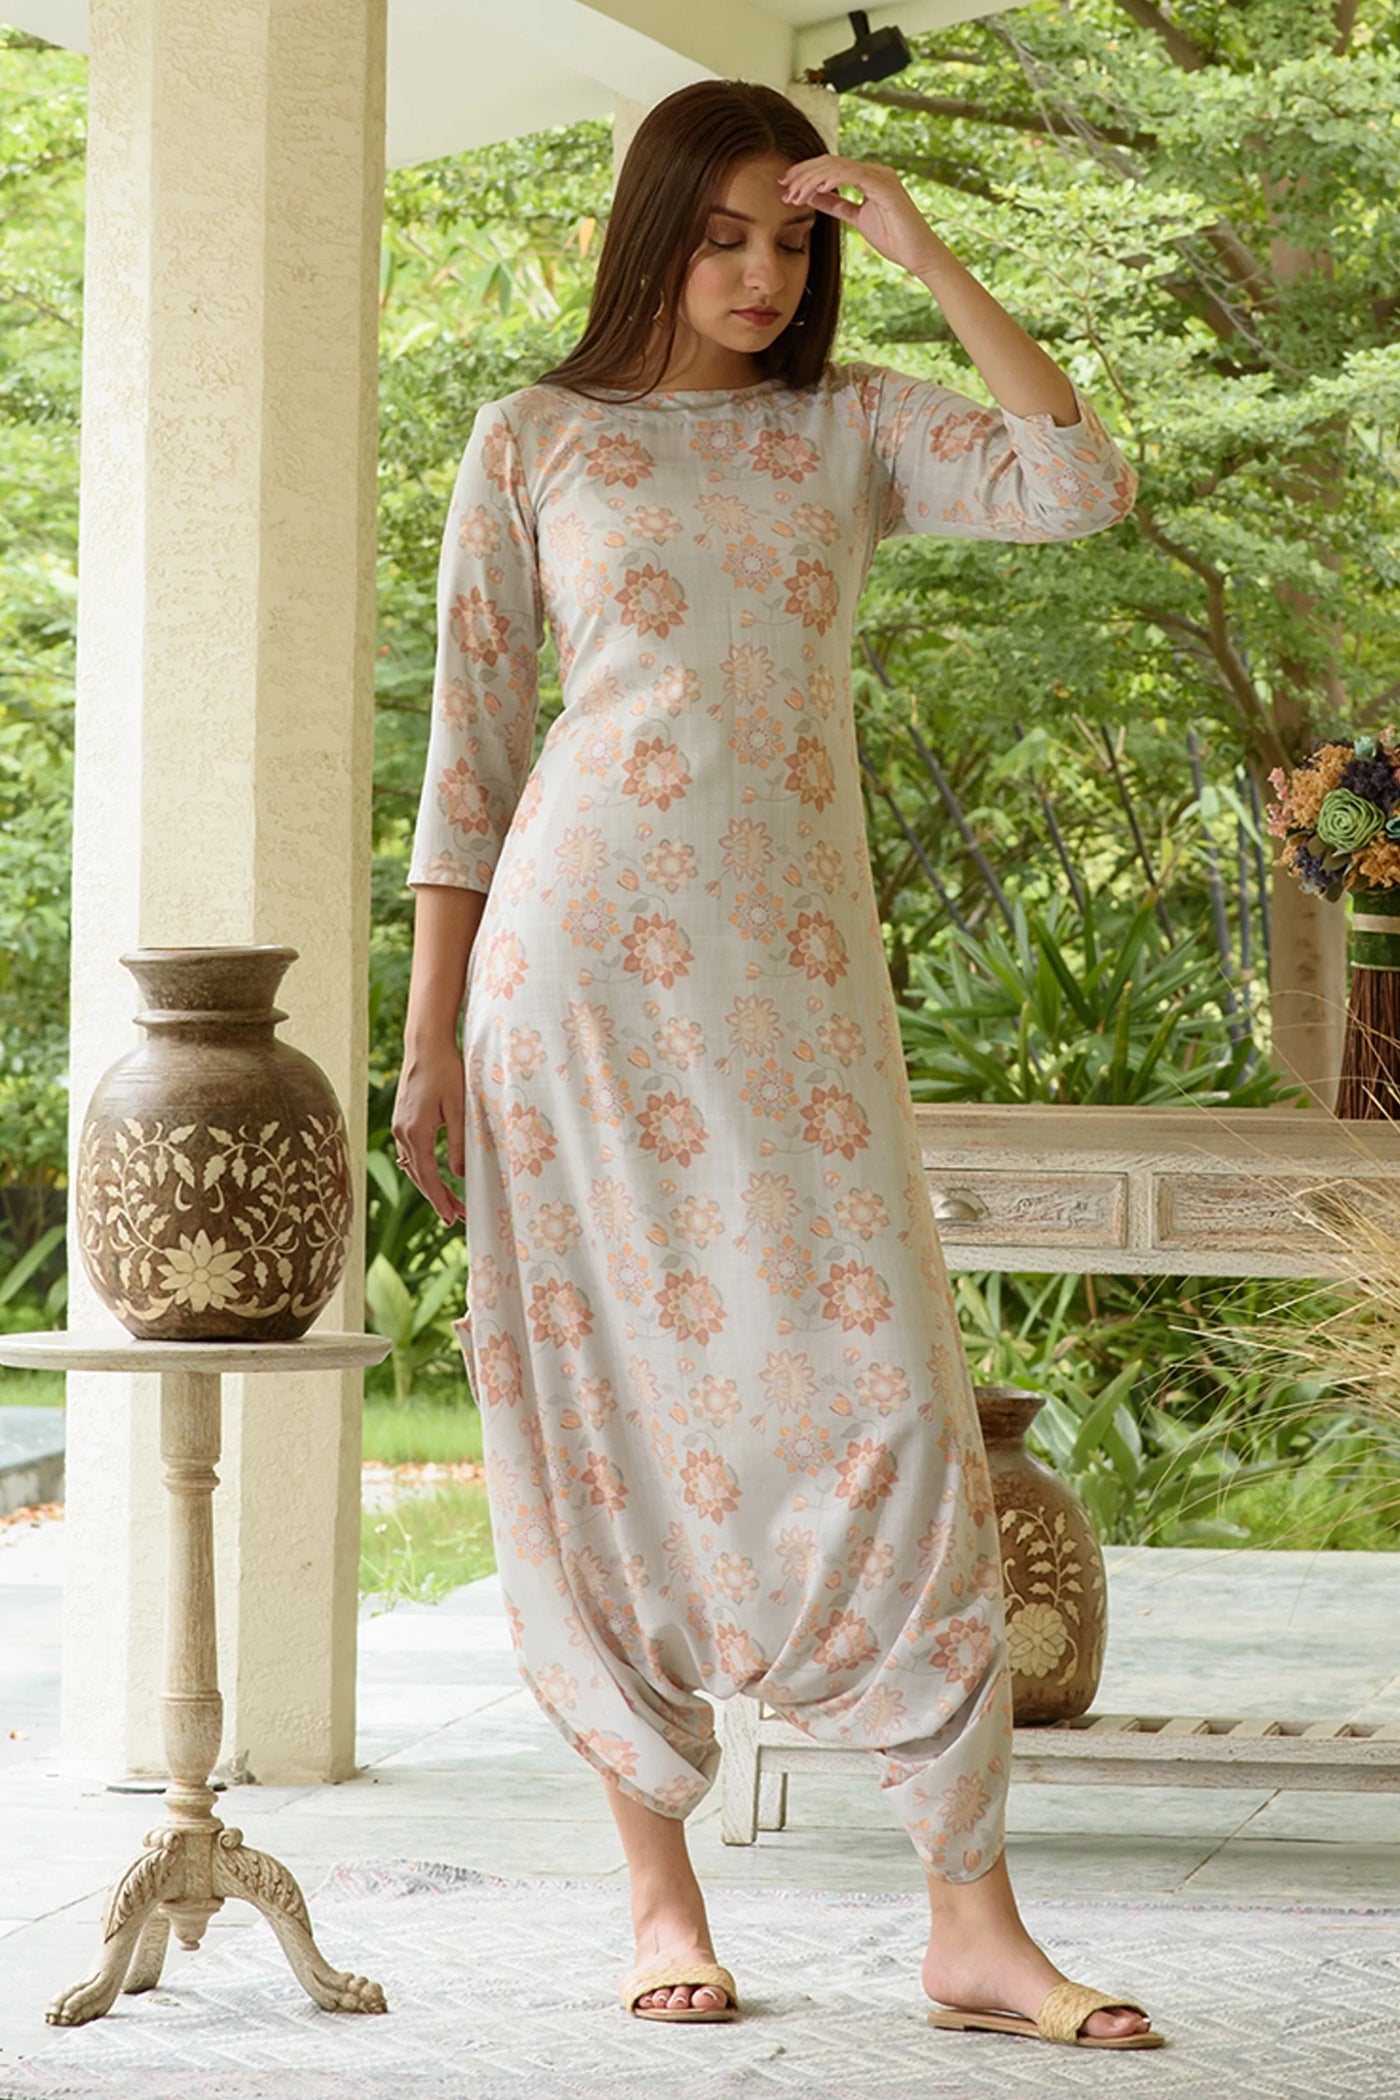 Linen Floral Printed Dhoti Jumpsuit - Indian Clothing in Denver, CO, Aurora, CO, Boulder, CO, Fort Collins, CO, Colorado Springs, CO, Parker, CO, Highlands Ranch, CO, Cherry Creek, CO, Centennial, CO, and Longmont, CO. Nationwide shipping USA - India Fashion X